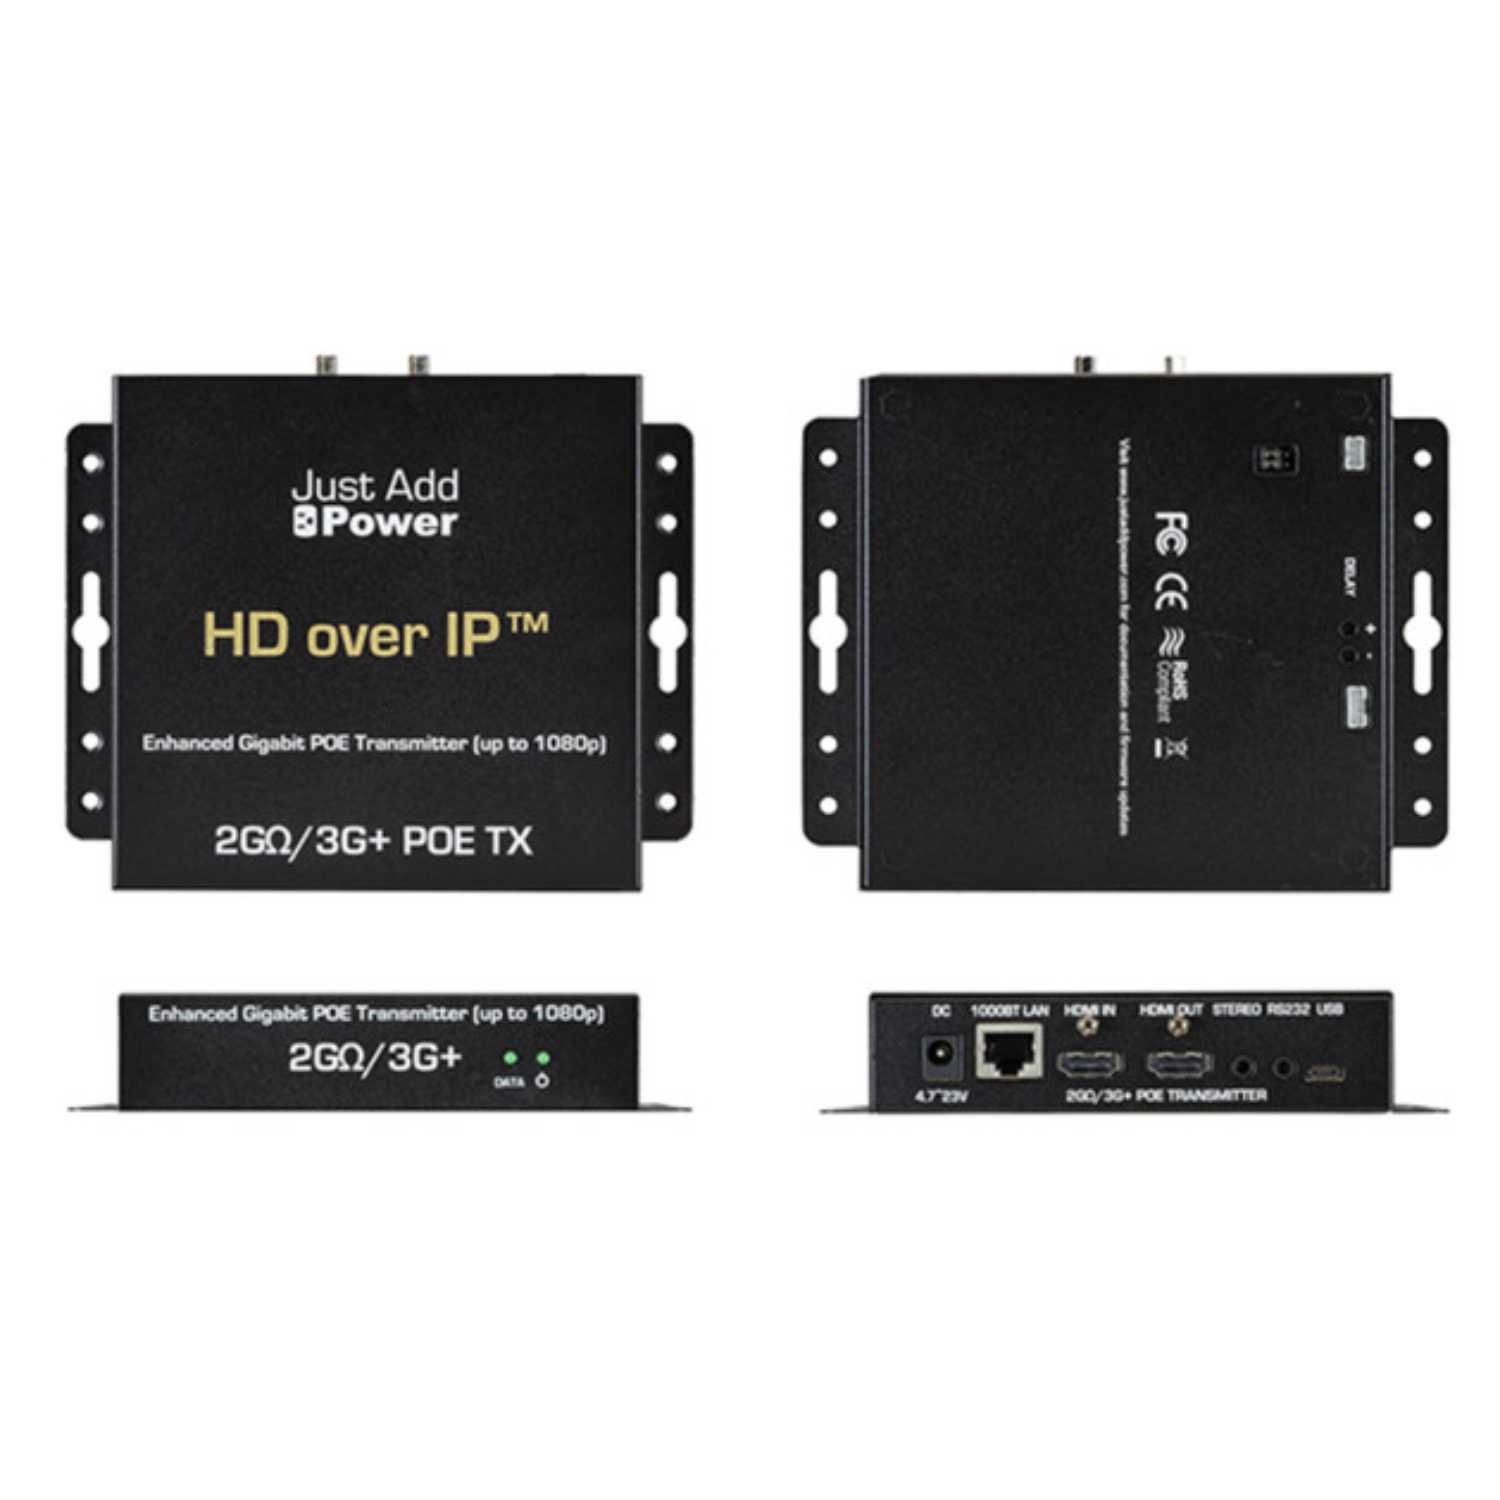 Just Add Power VBS-HDIP-715POE 2GΩ/3G+ Transmitter(to 1080p)